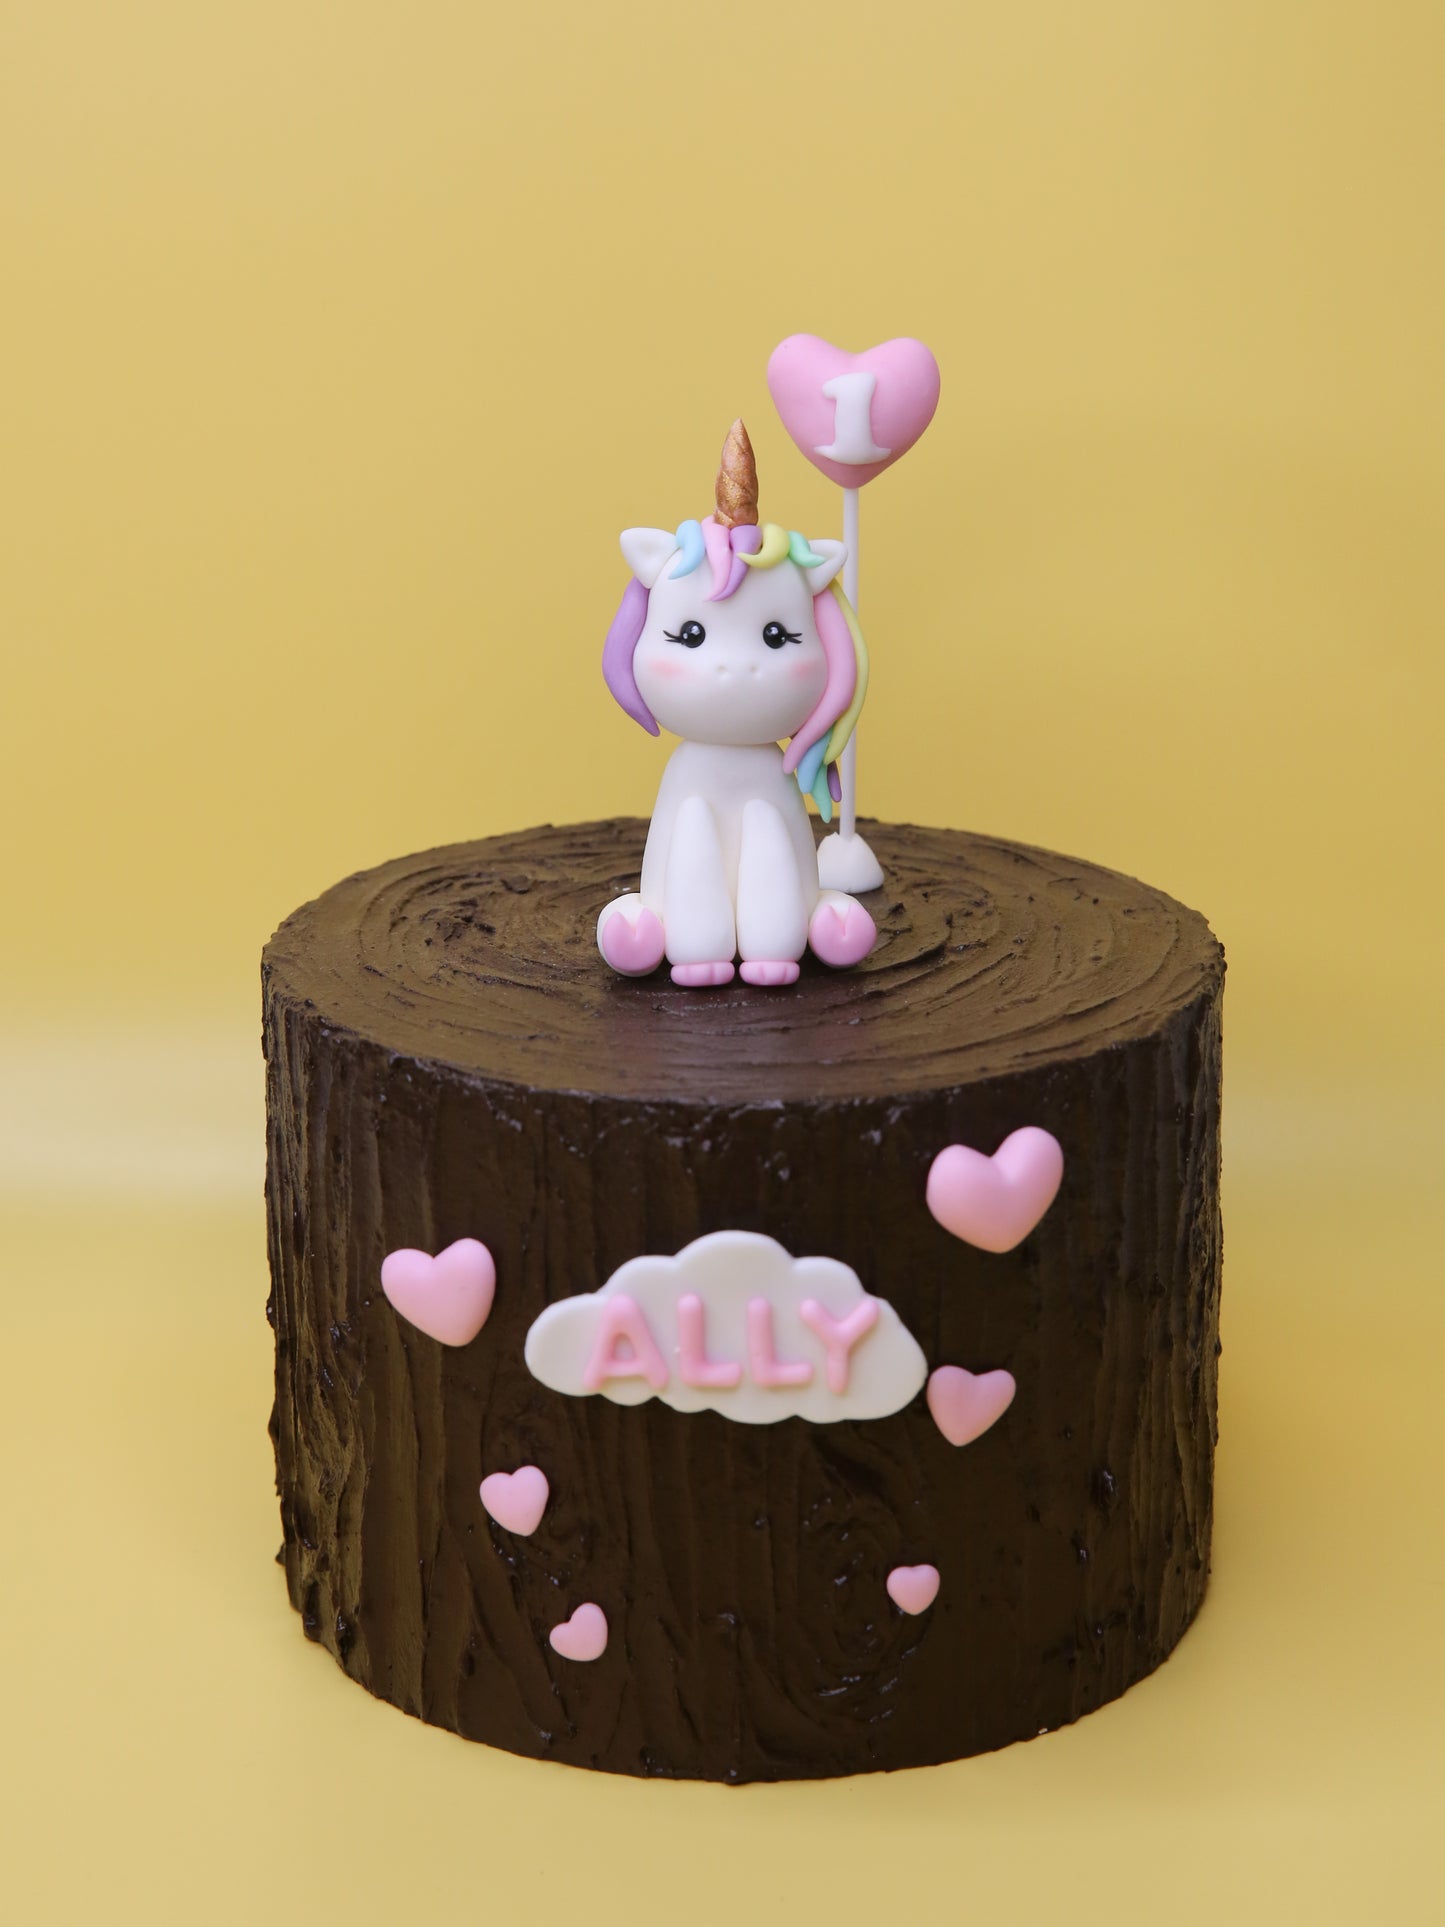 Cute Unicorn Cake Topper Fondant with Personalised Number, Name Tag, and Decorations